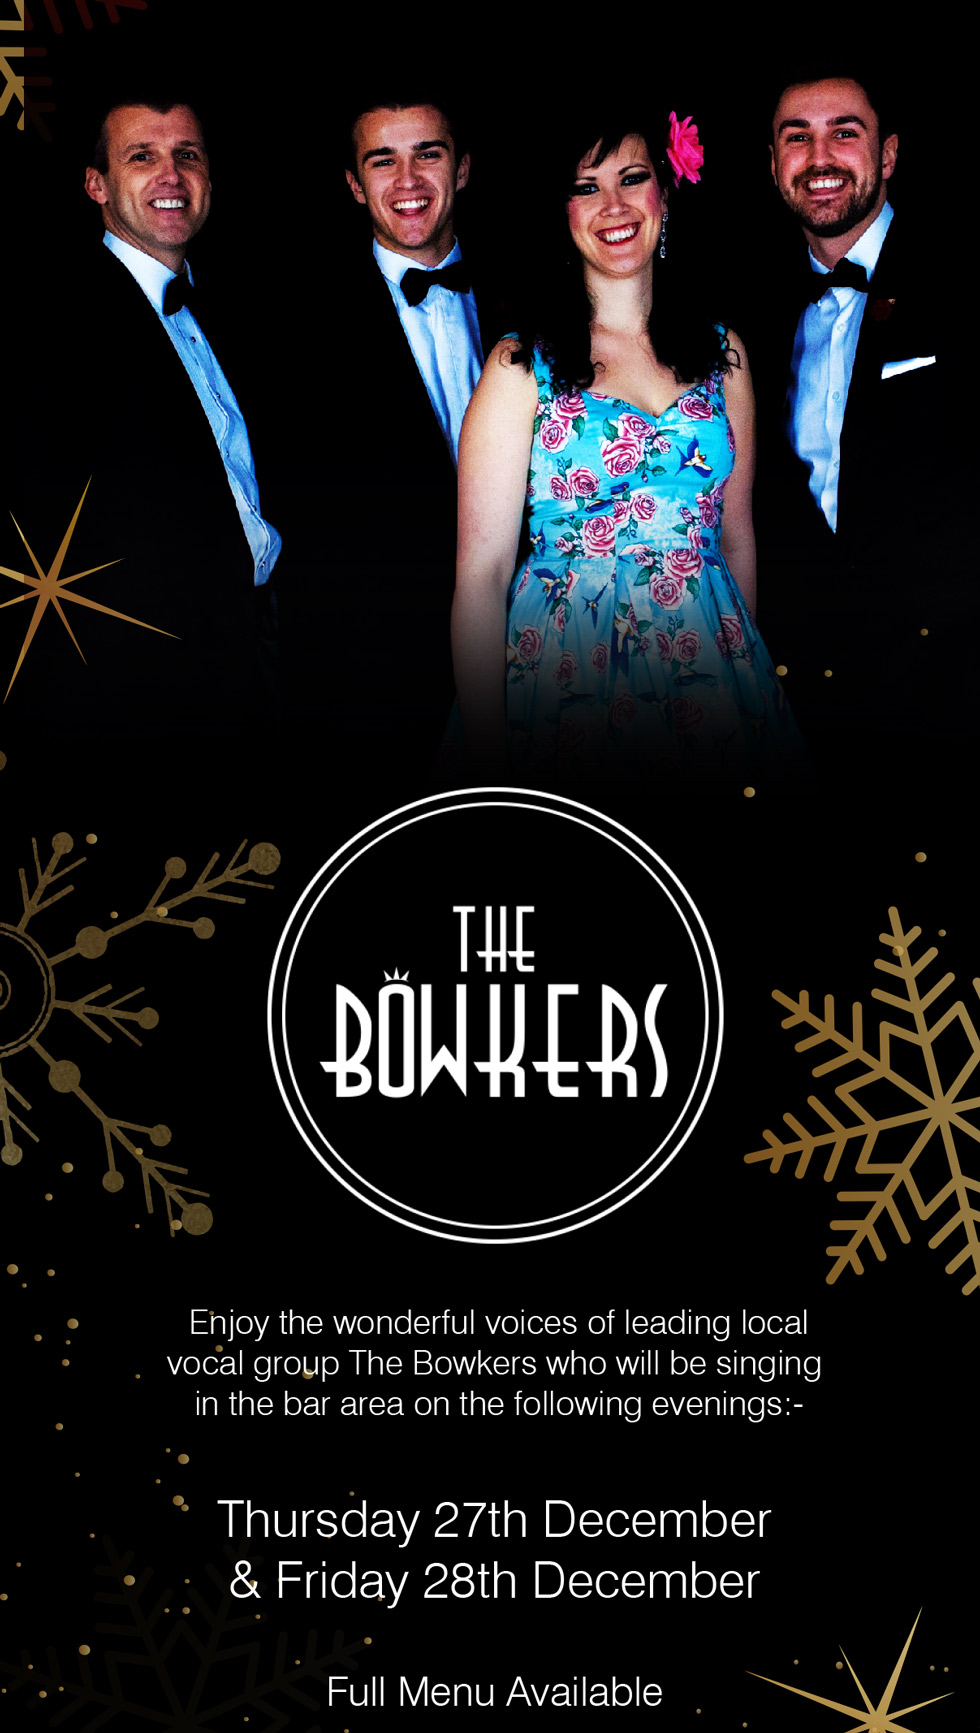 The Bowkers